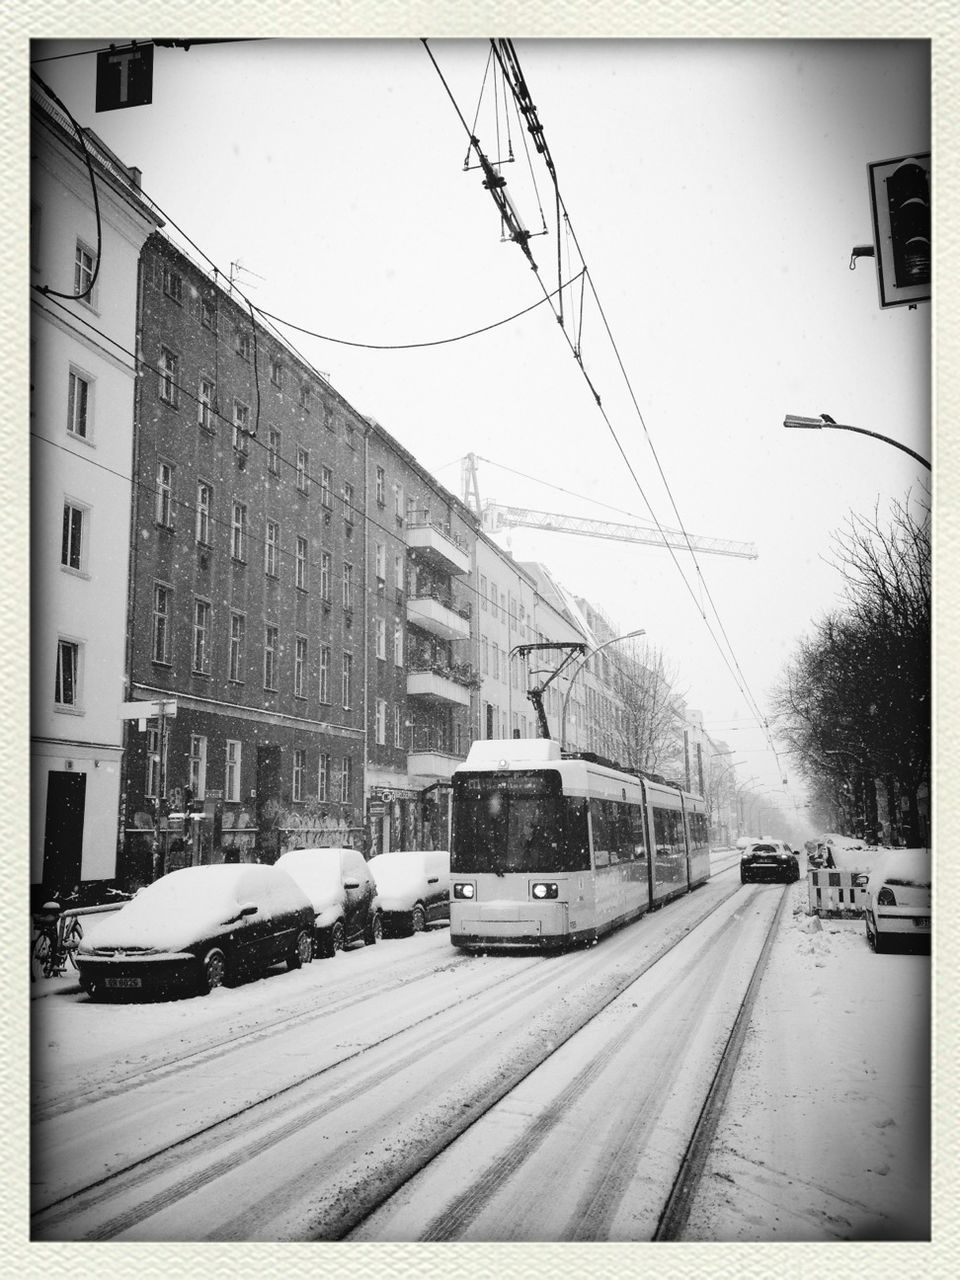 Cable car on snow covered street by buildings against sky